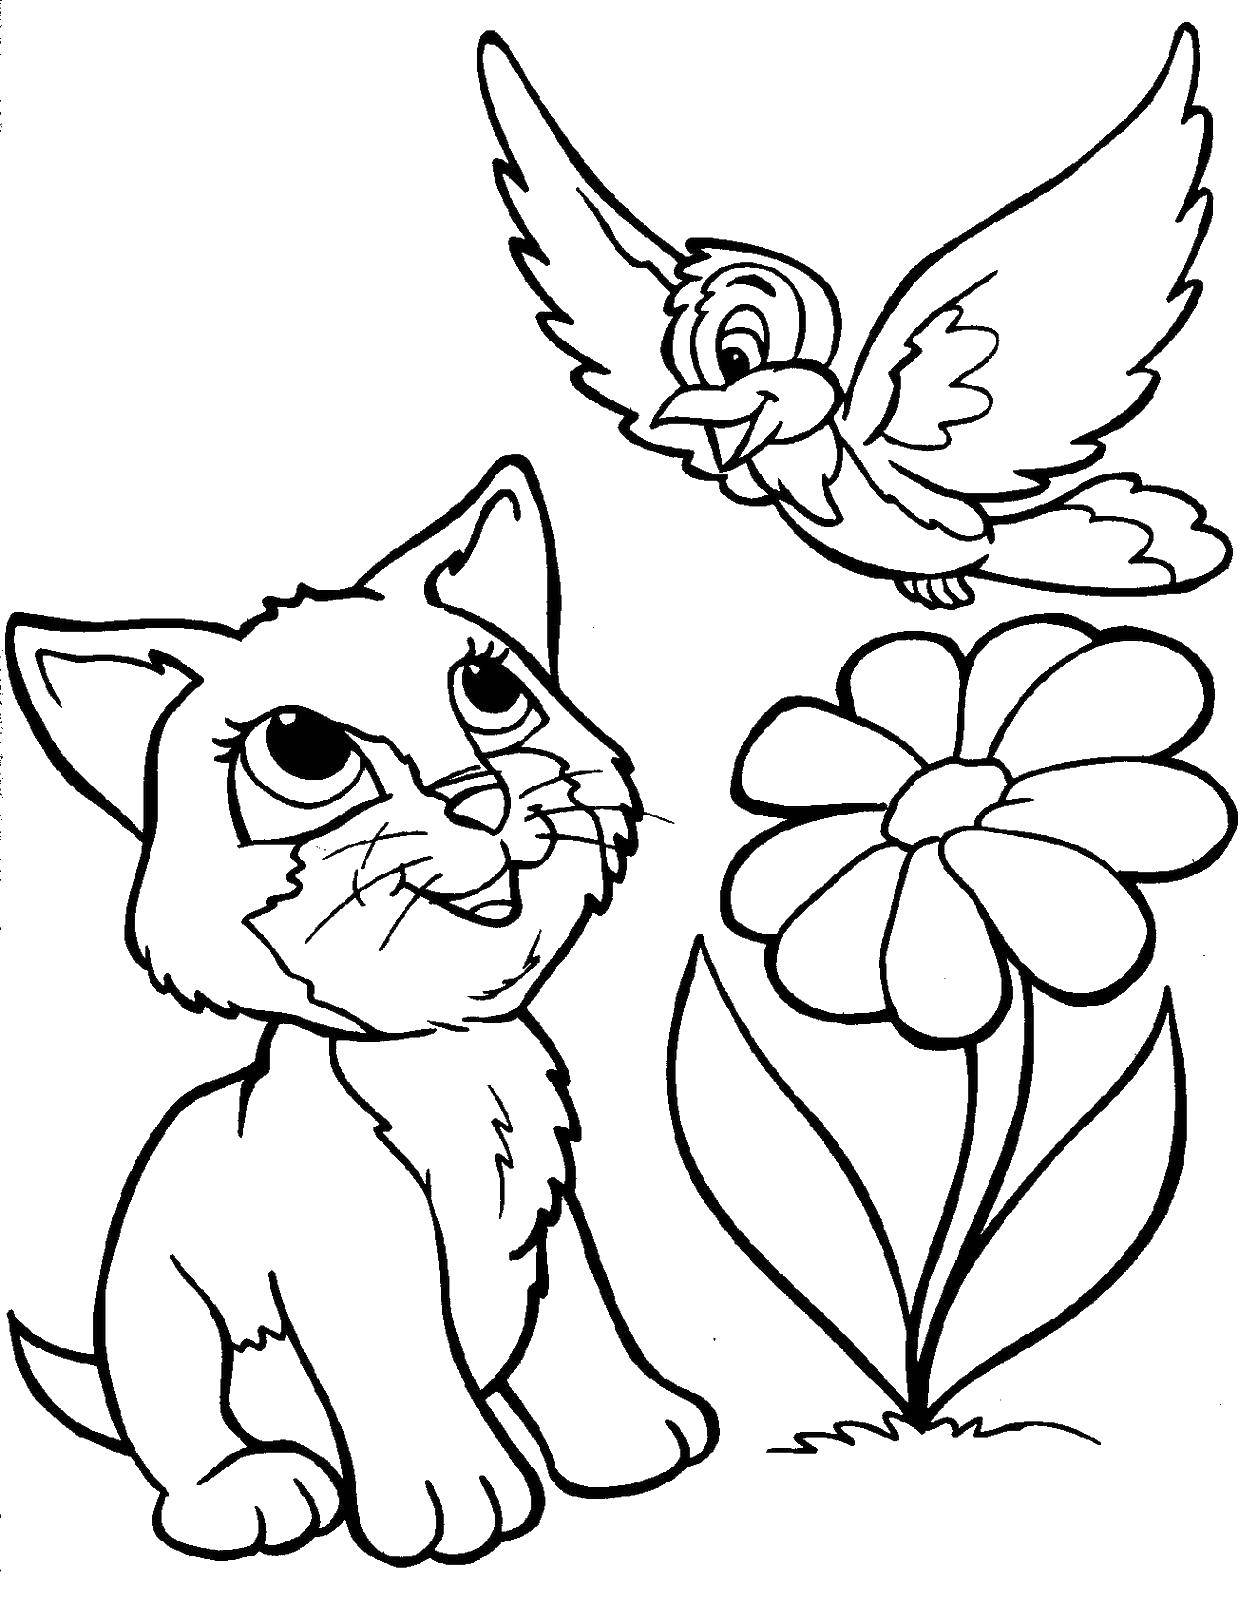 Coloring Kitty saw the birdy. Category animals. Tags:  Animals, kitten.